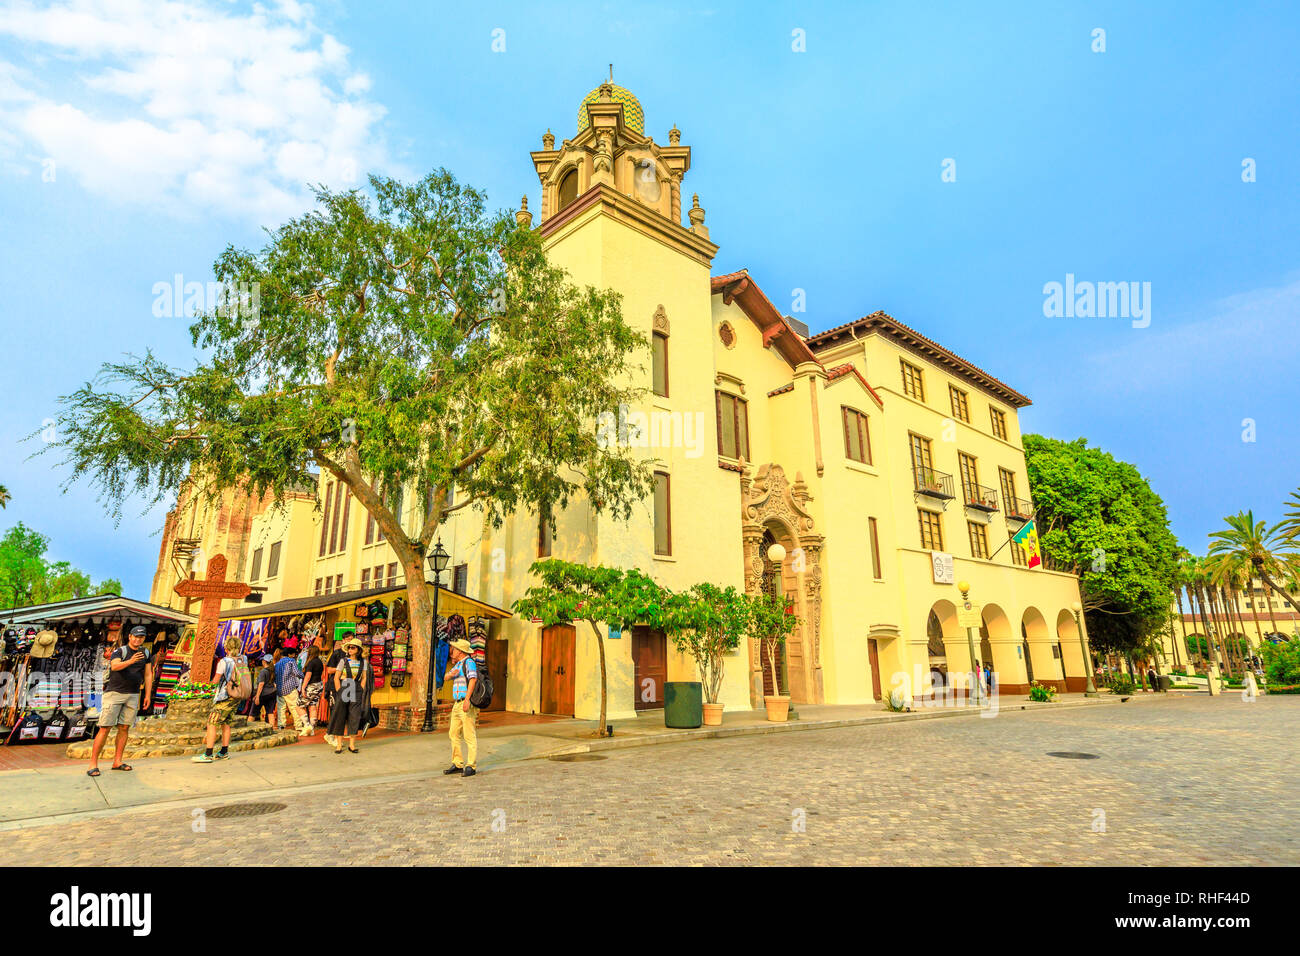 Los Angeles, California, United States - August 9, 2018: Olvera Street and Old Plaza Church or La Plaza United Methodist Church in El Pueblo, a State Stock Photo